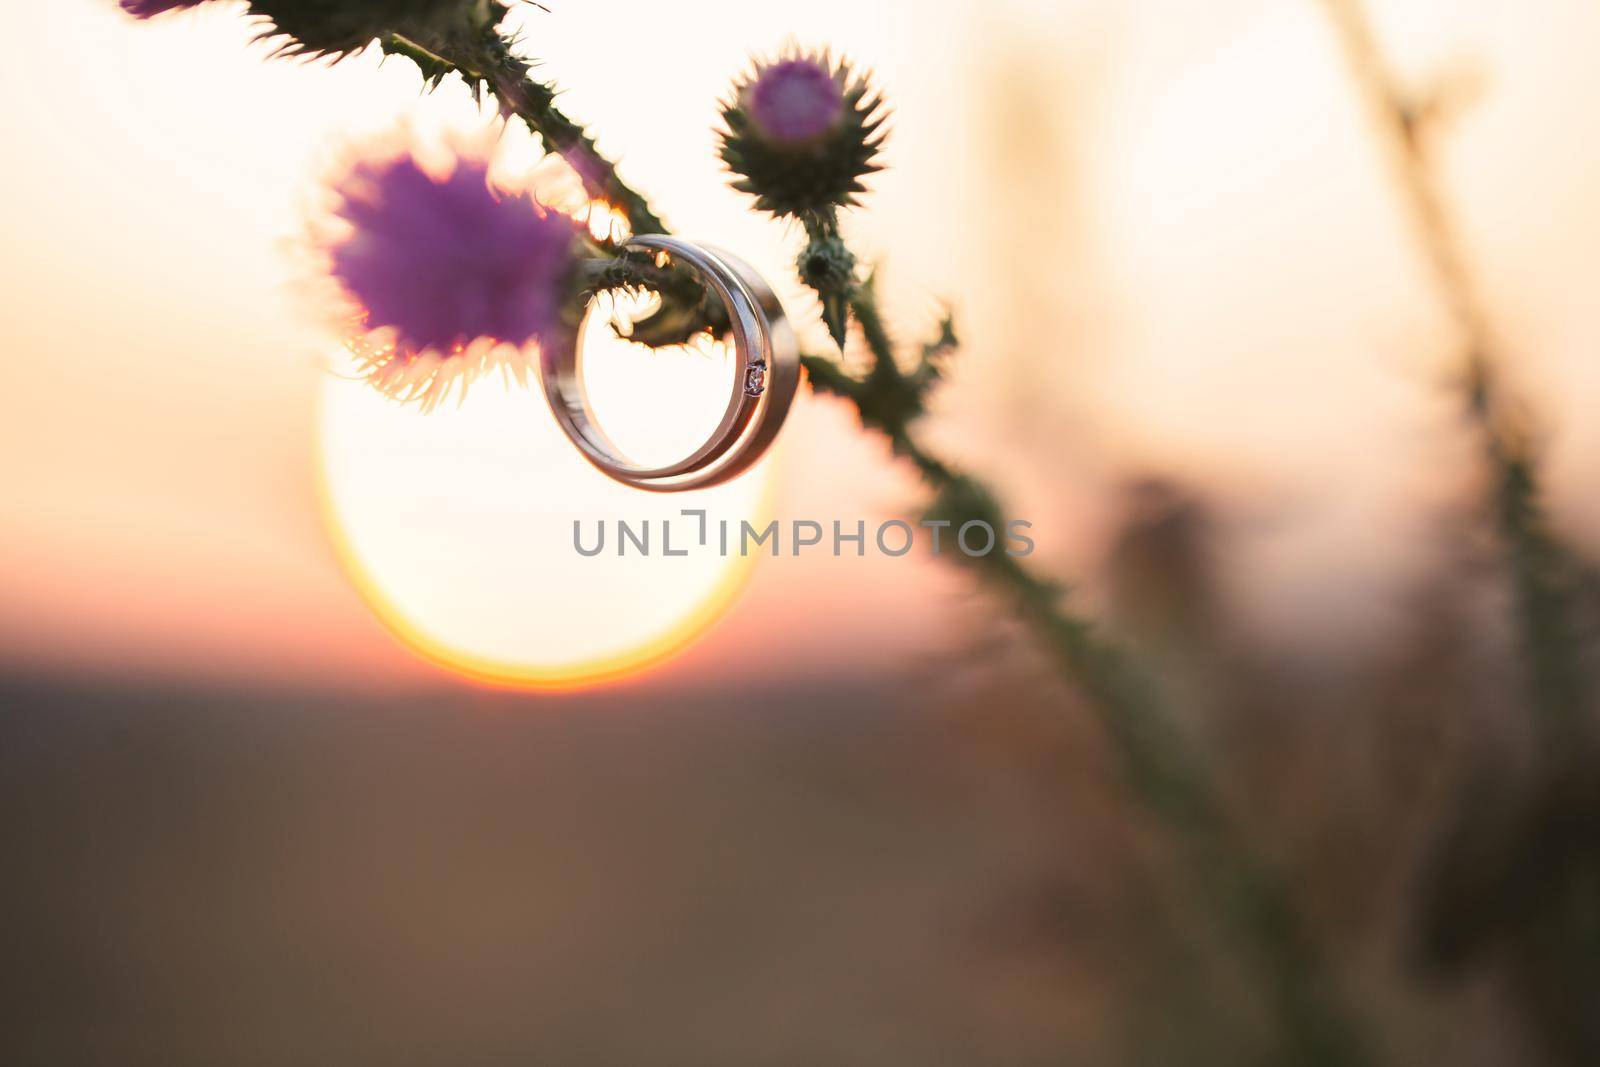 Wedding rings hang on a flower against the background of the sunset. by StudioPeace